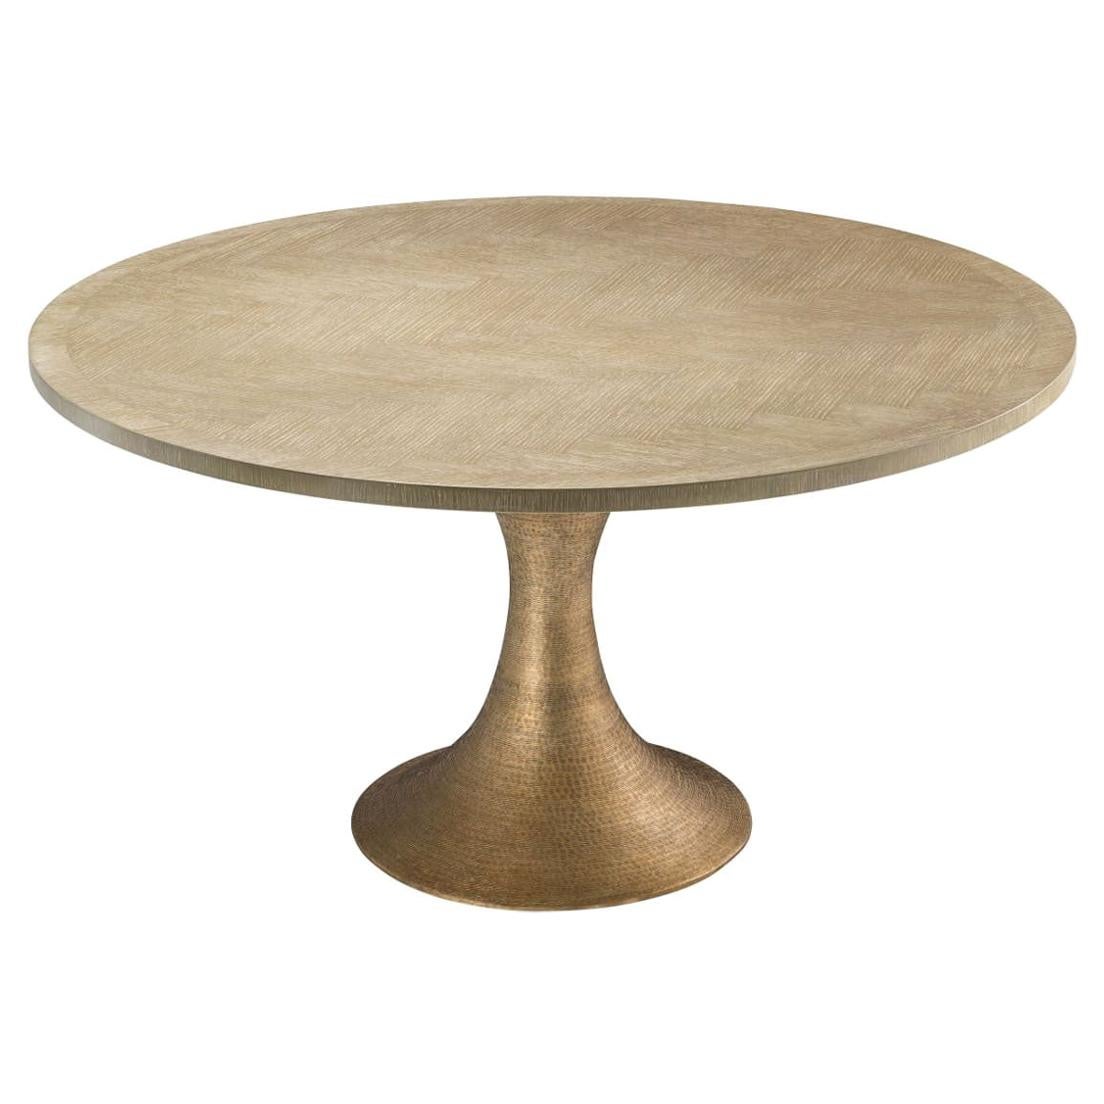 1970s Design Style Brass and Wooden Round Pedestal Dining Table For Sale